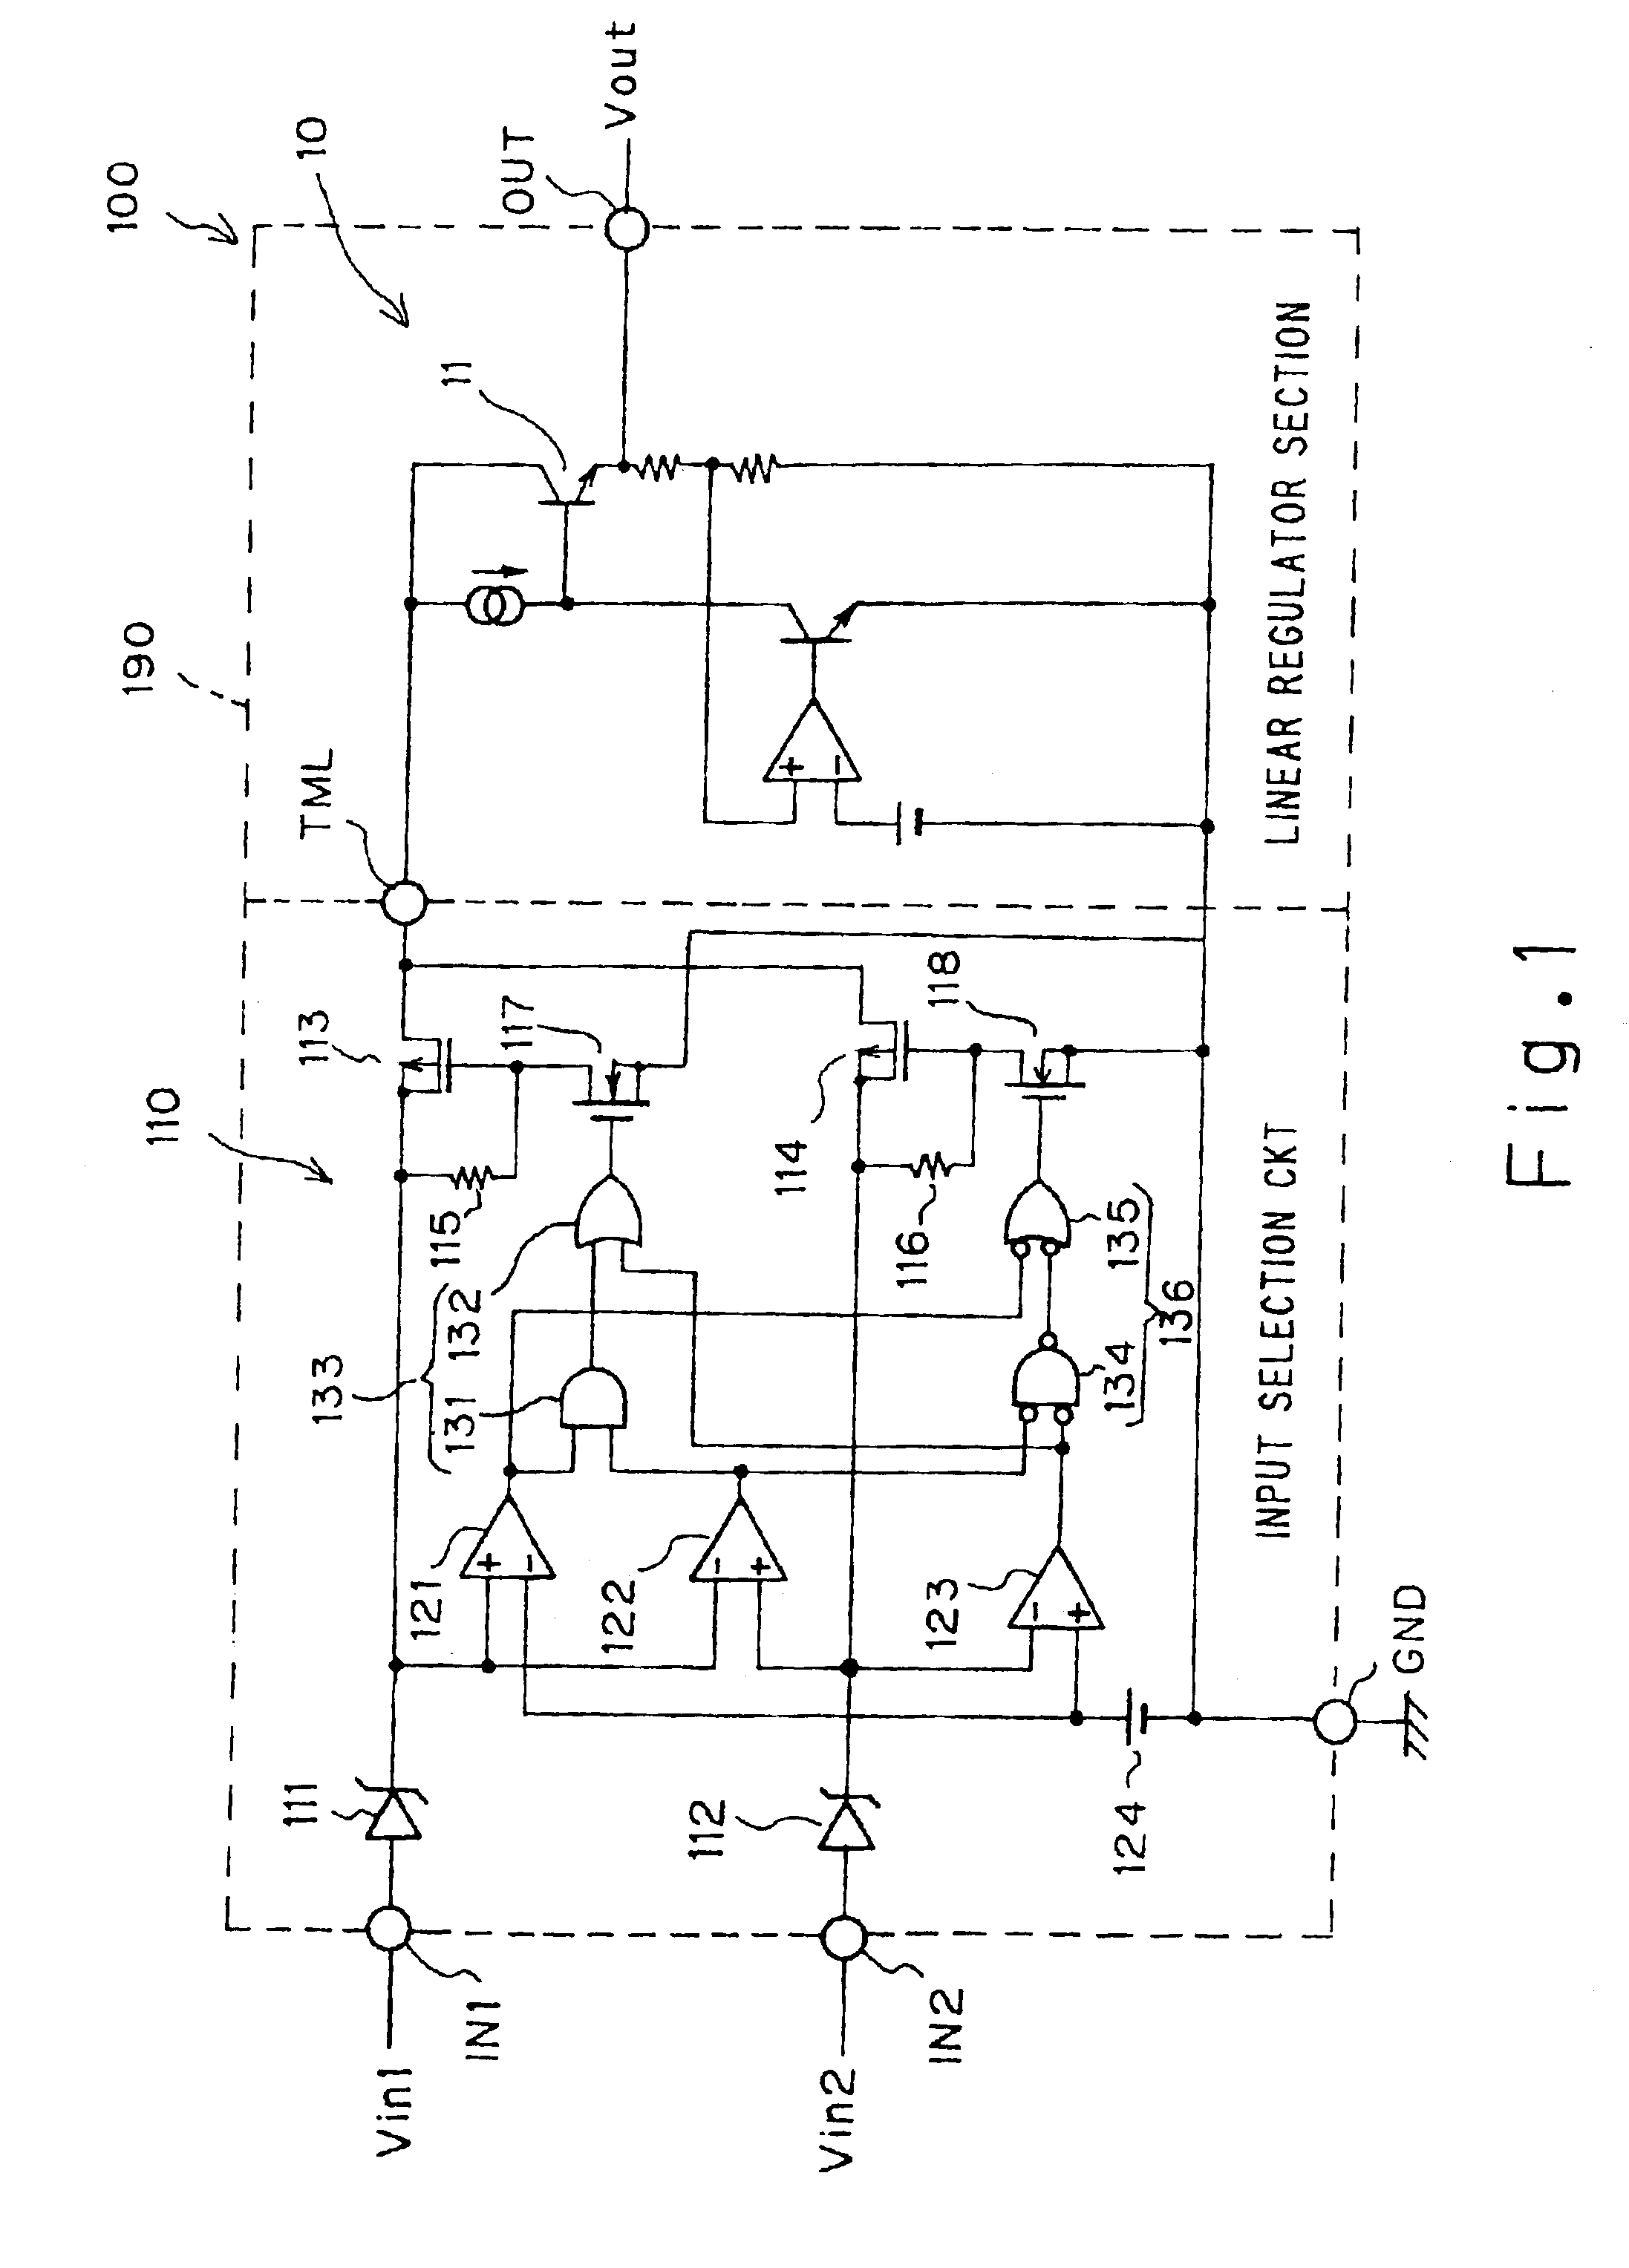 DC-DC converter circuit, power supply selection circuit, and apparatus useful for increasing conversion efficiency